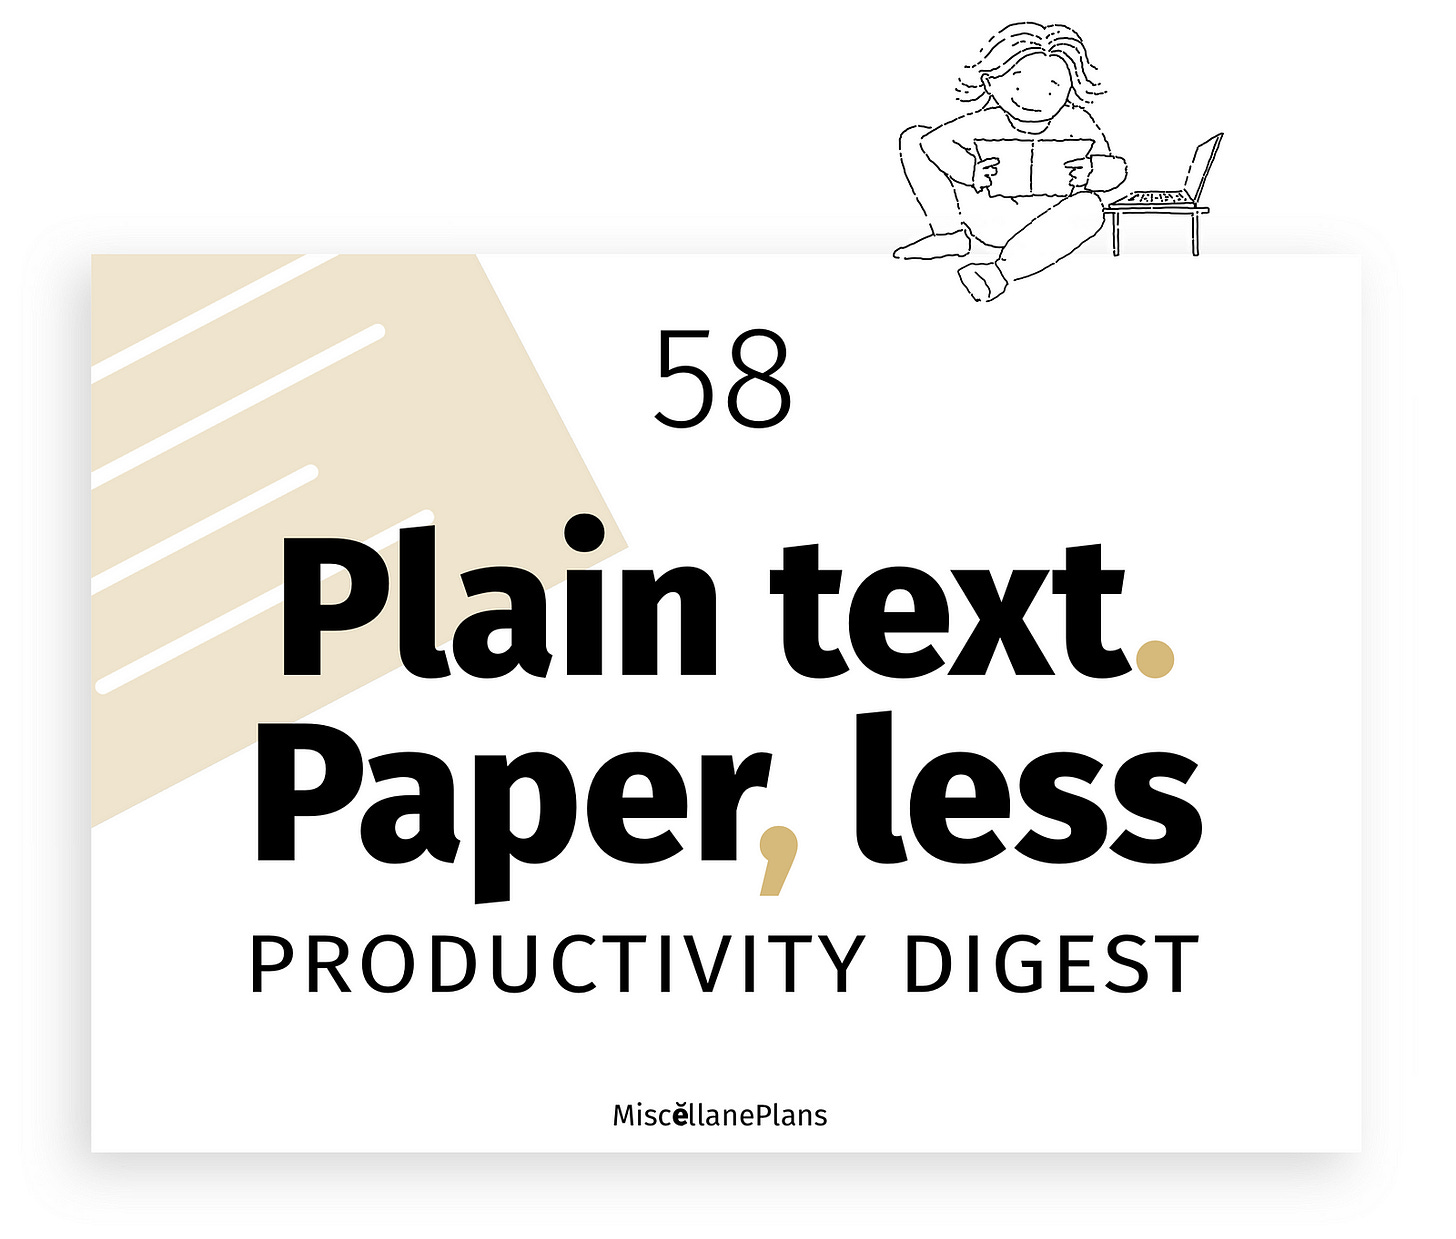 Black text on a white background, which reads 58 Plain text. Paper, less Productivity Digest. There’s a beige rectangle with 4 thin white lines on it, on an angle behind the text, representing a file or a piece of paper. A small line drawing of the author is perched on the PTPL 58 graphic. The figure is reading a book, with an open laptop at her side.